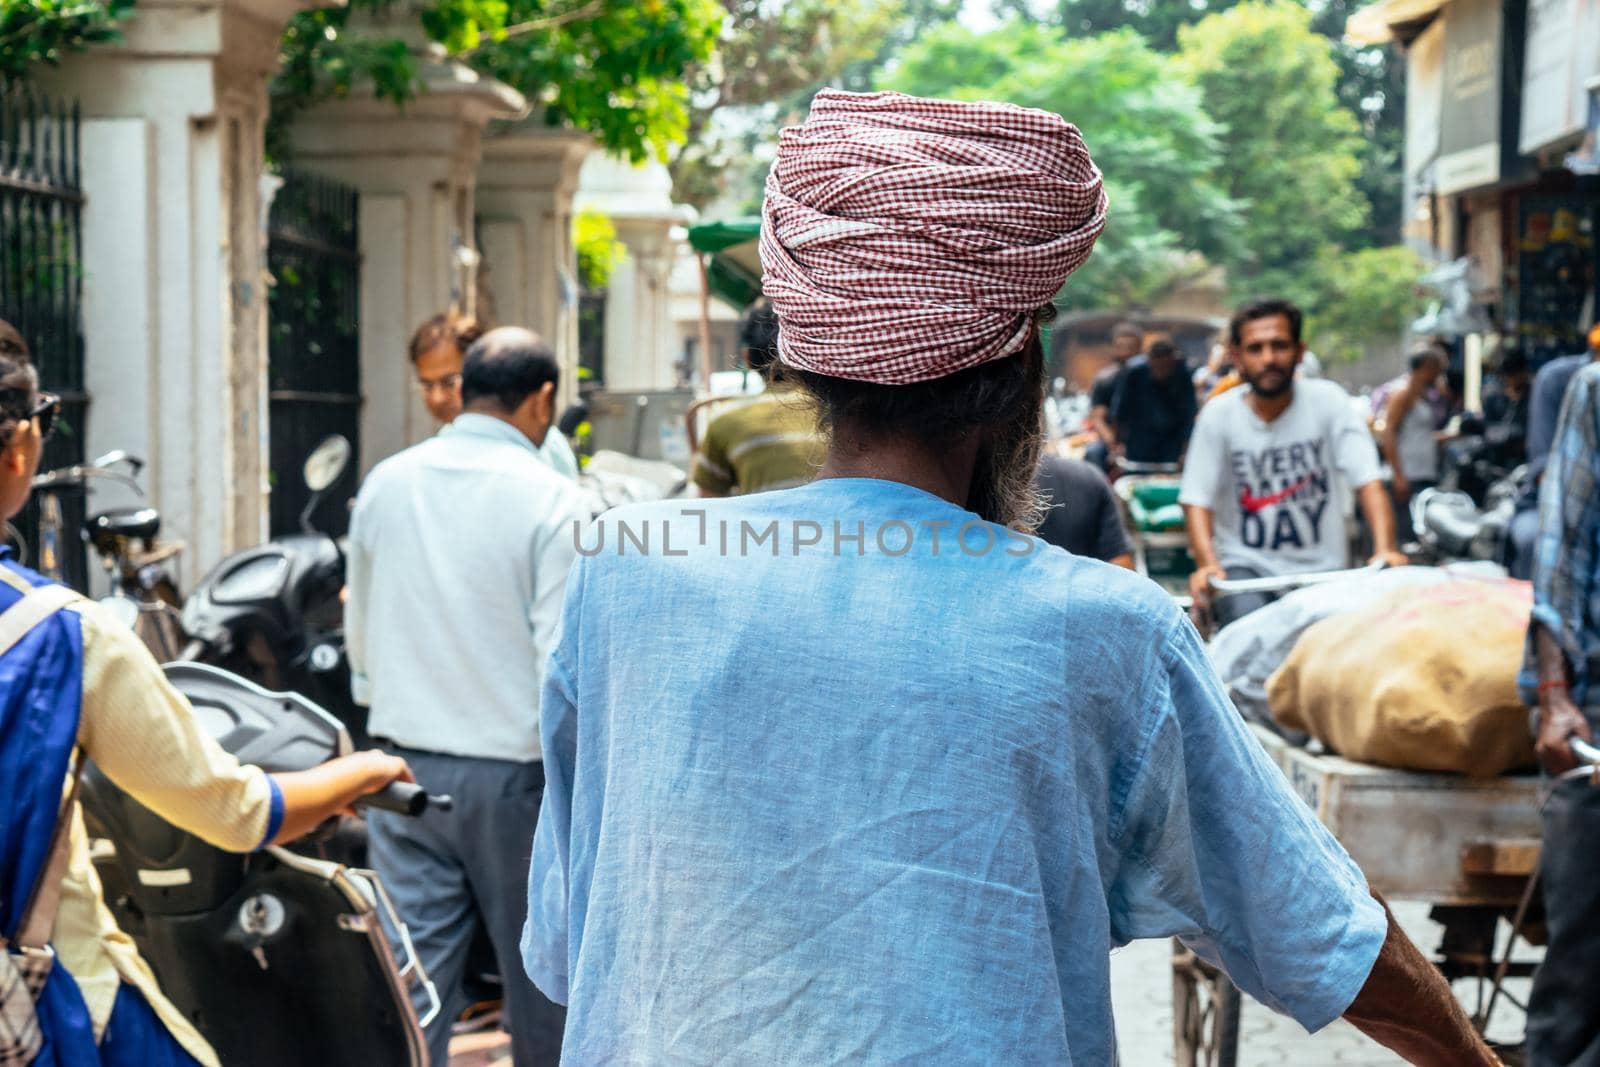 Indian unrecognizable back man with turban on his head